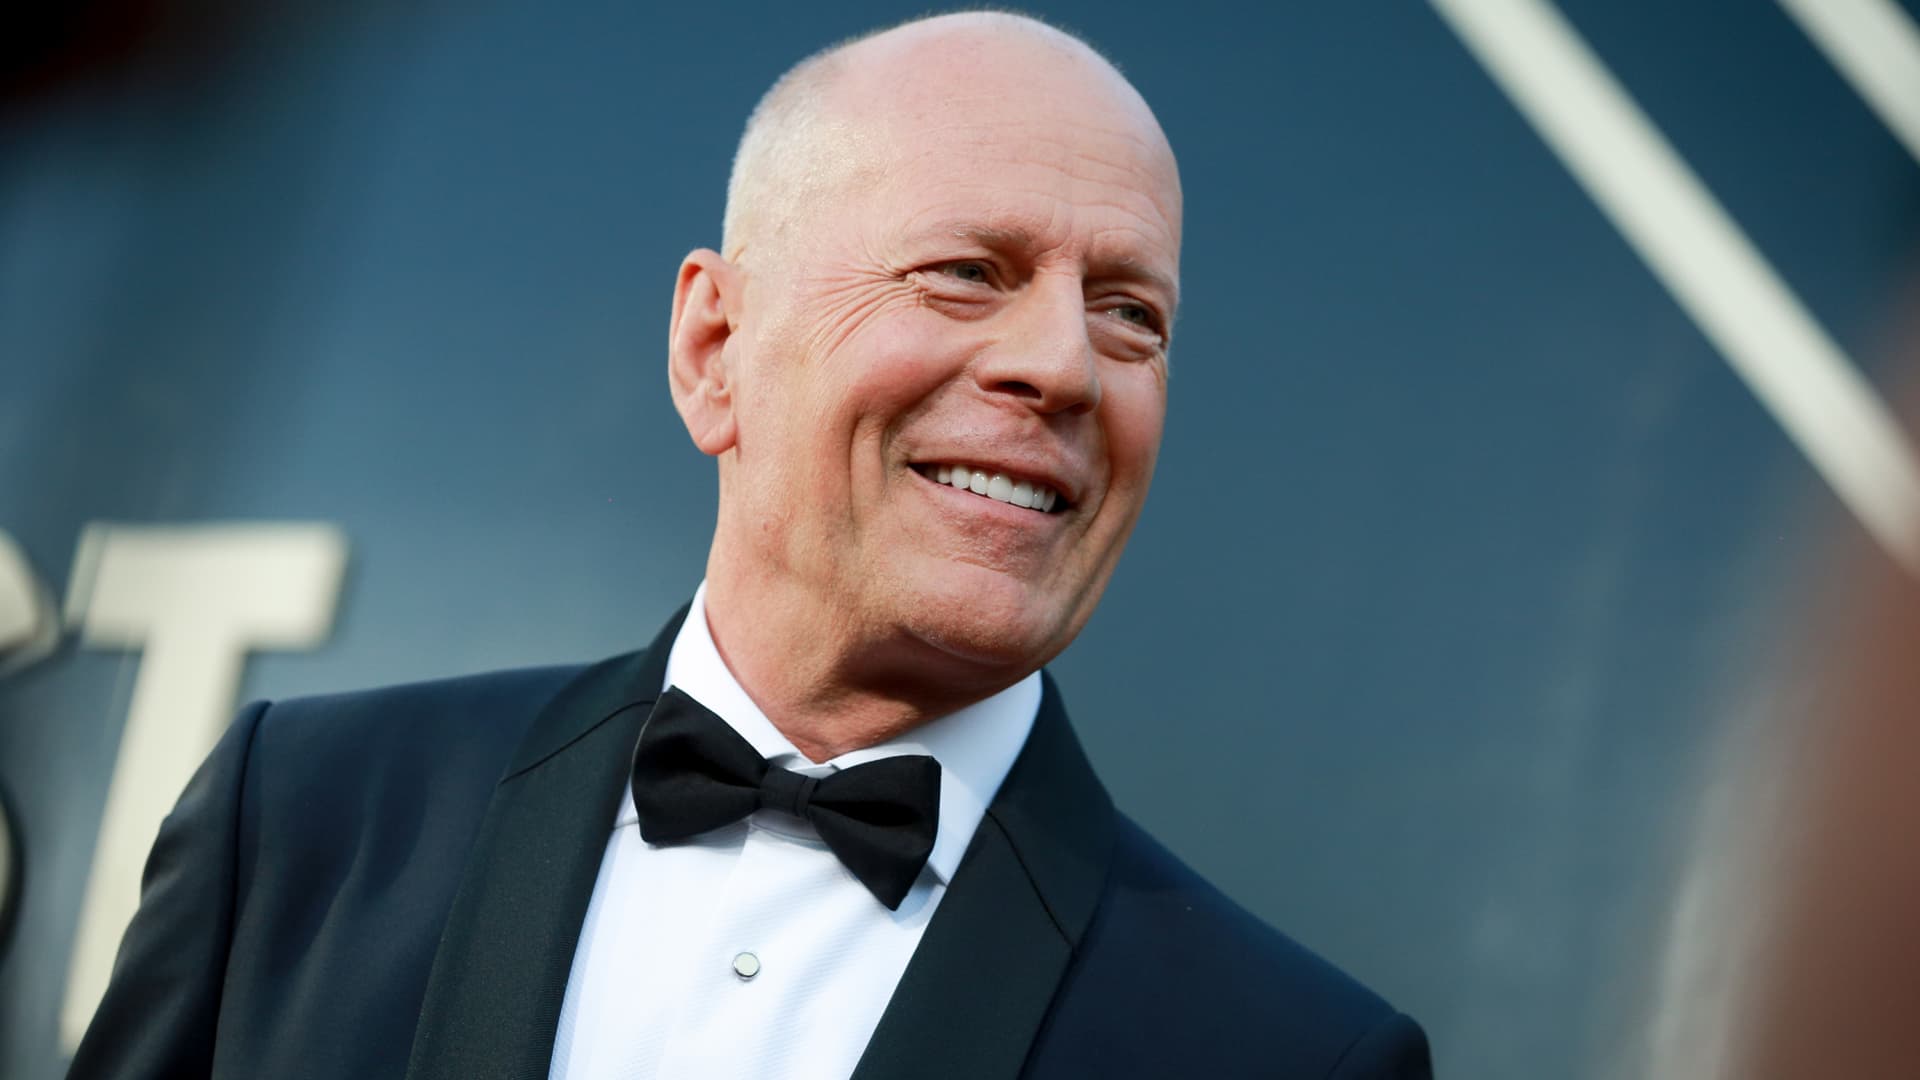 Bruce Willis' 'situation has progressed' to frontotemporal dementia, his household says